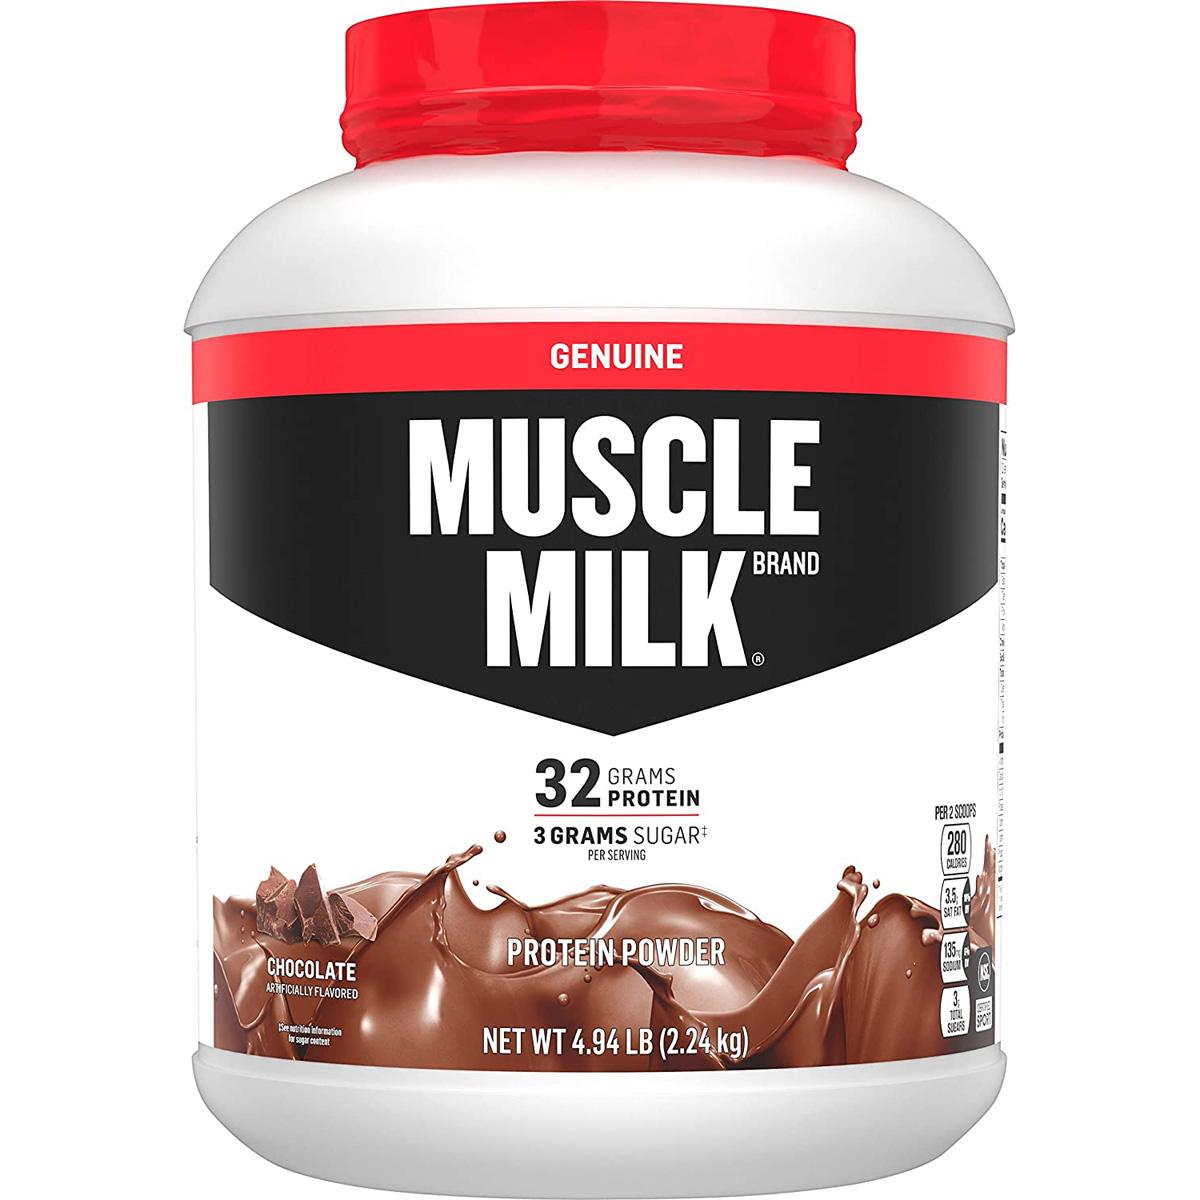 4.94lb Muscle Milk Genuine Protein Powder for $23.24 Shipped